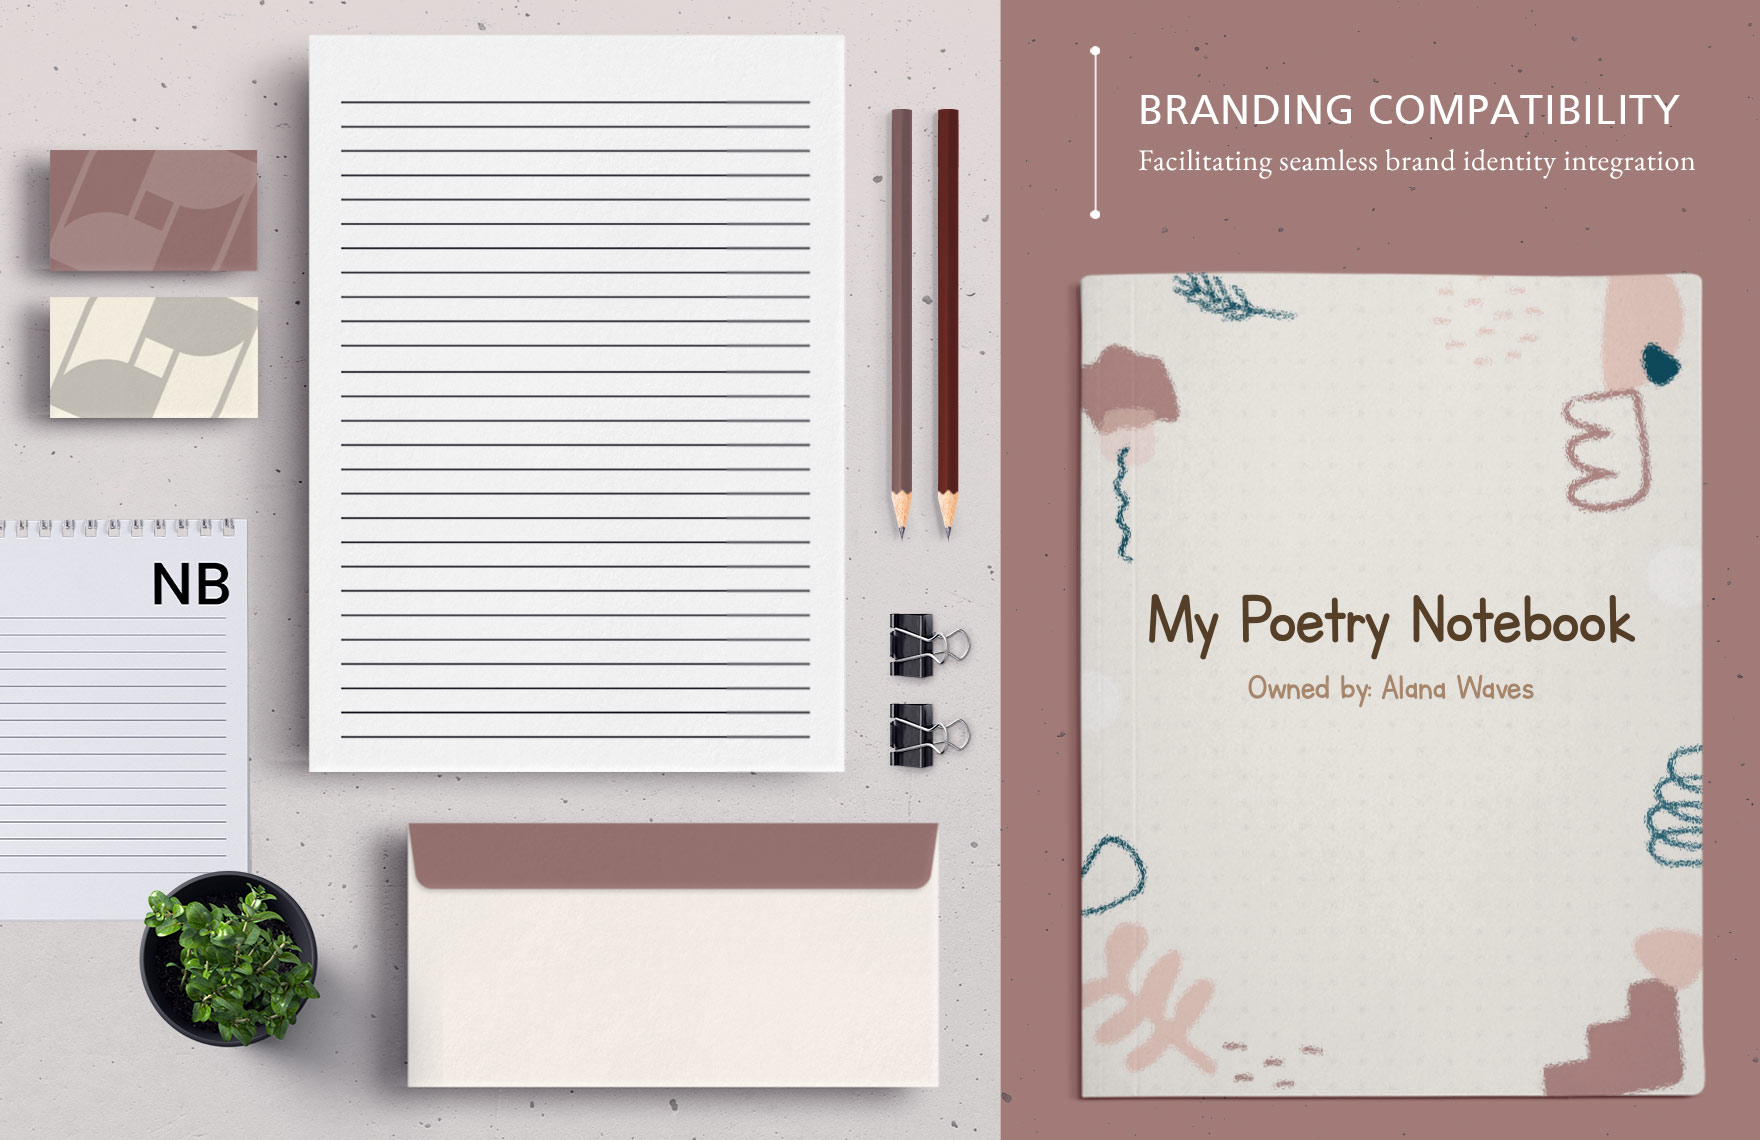 Poetry Notebook Template